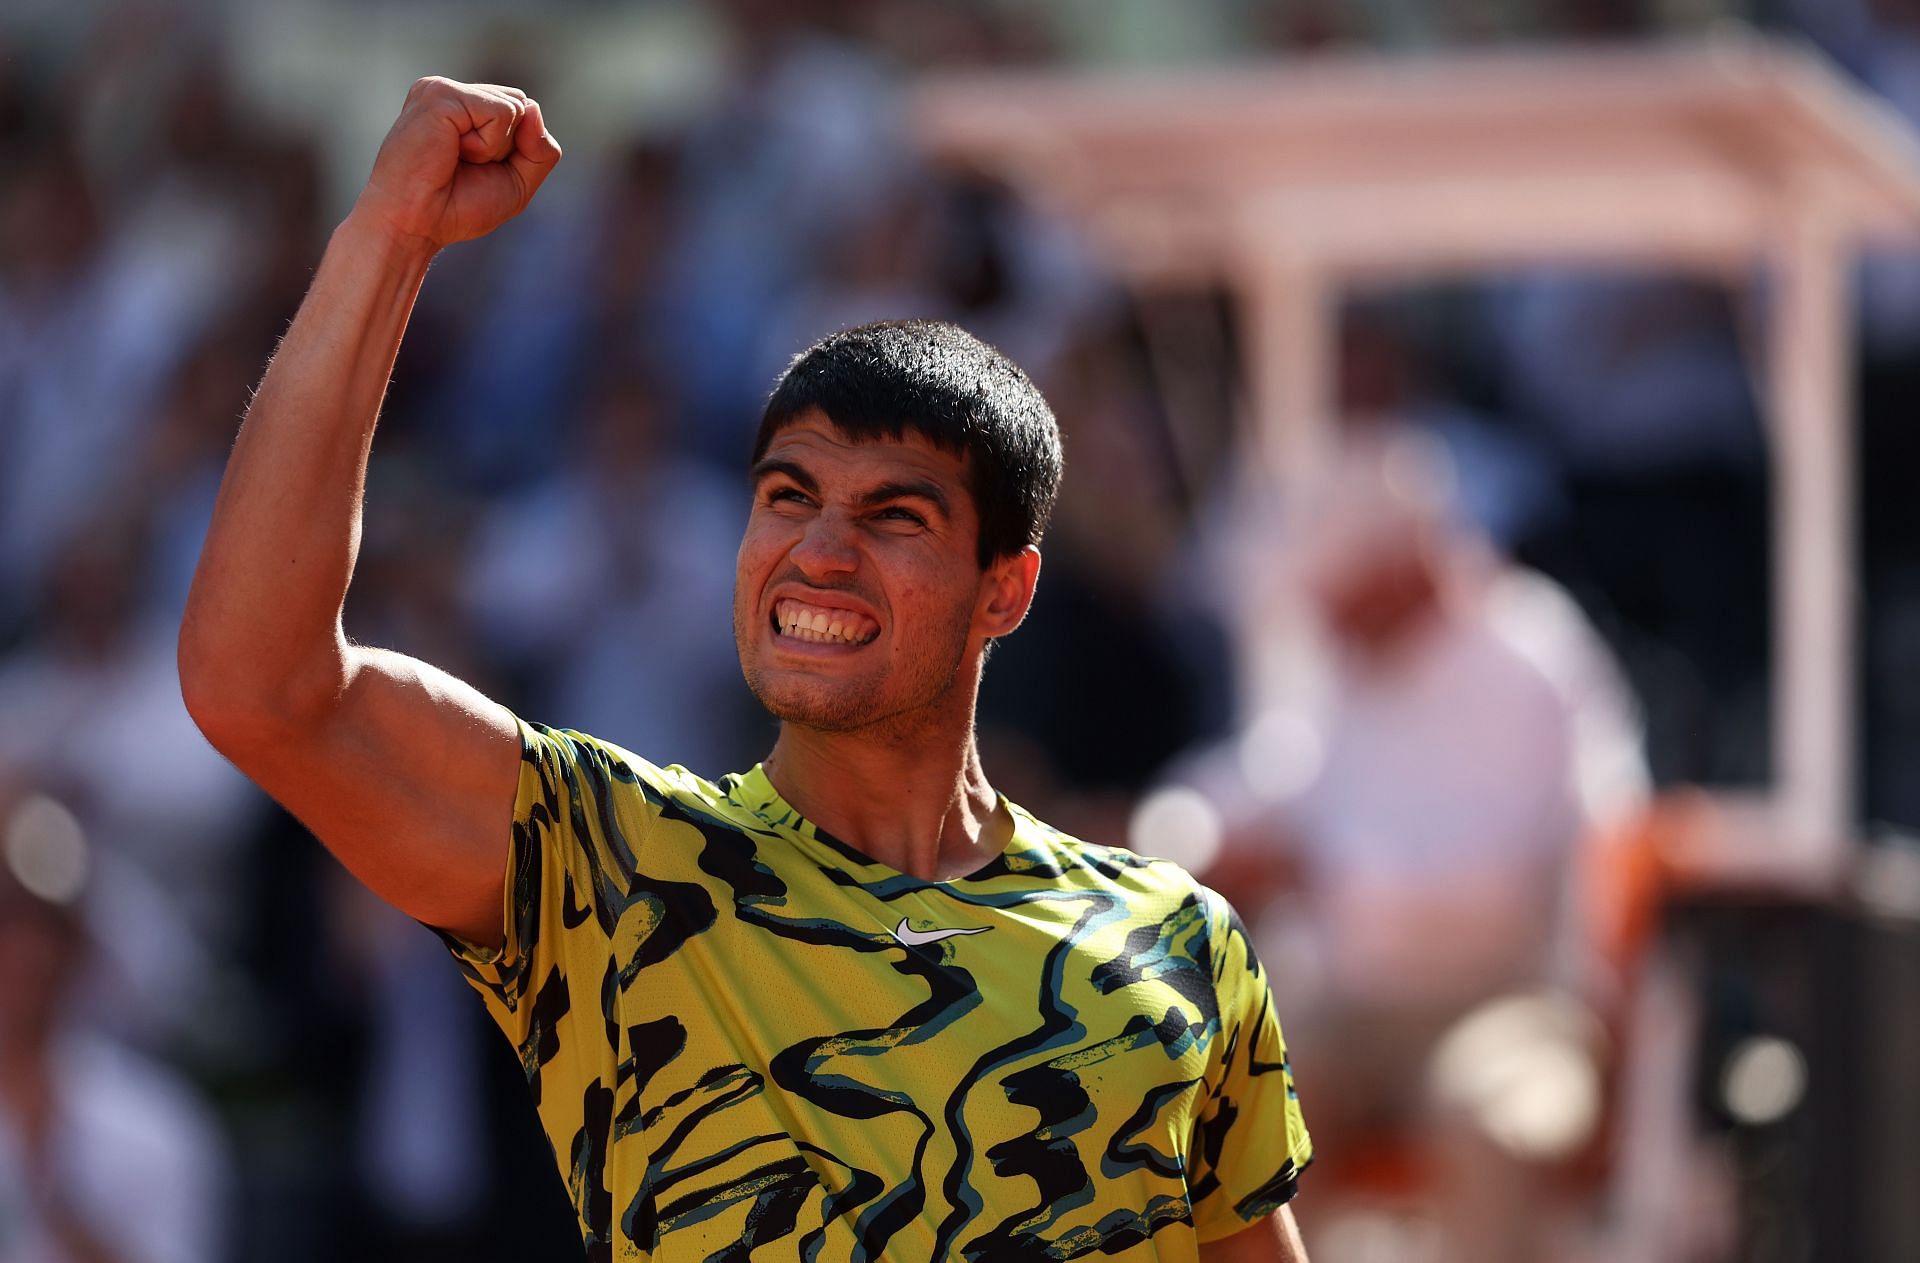 Alcaraz has been in great form at the 2023 Mutua Madrid Open